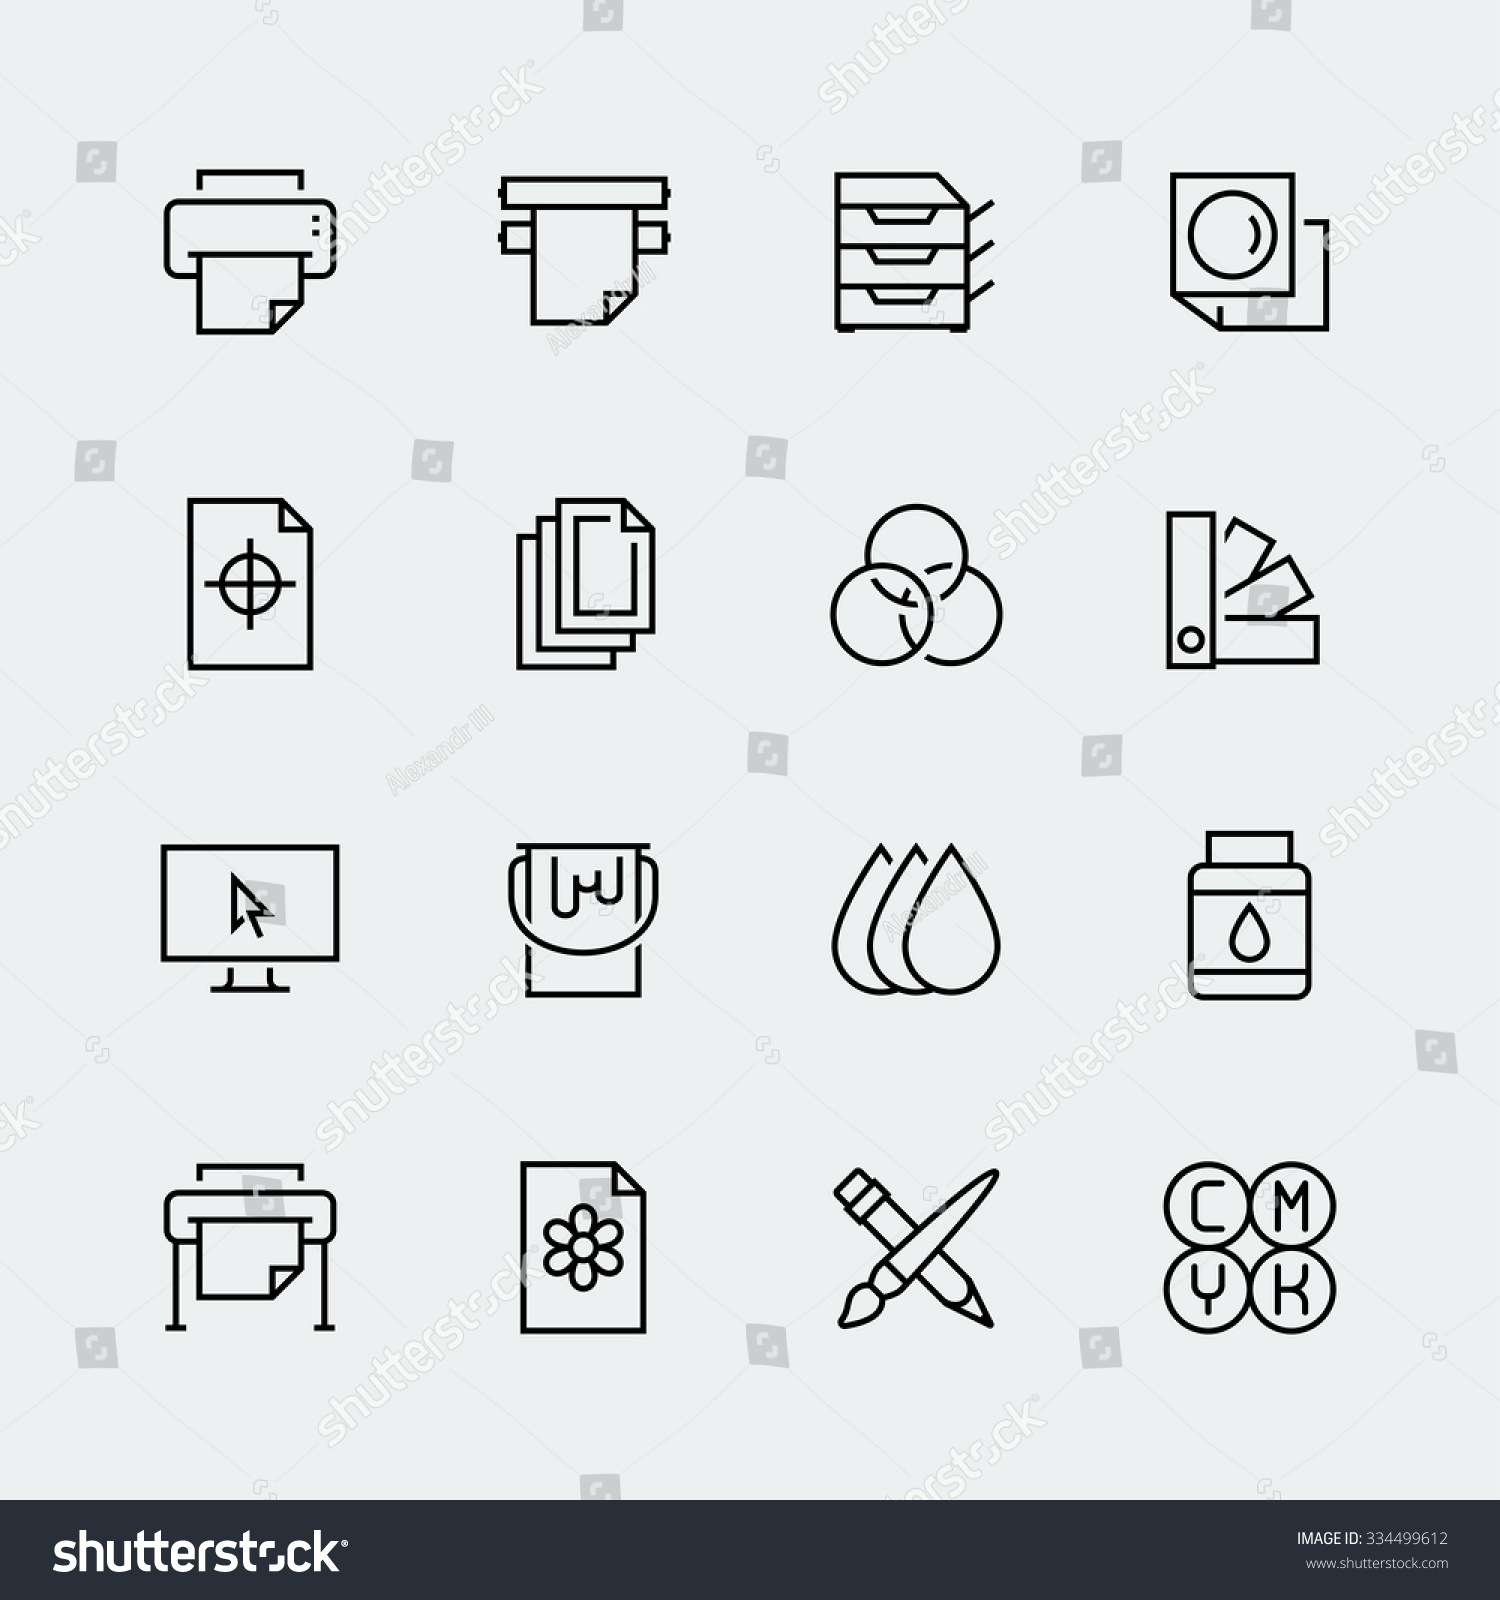 SVG of Printing vector icon set in thin line style svg